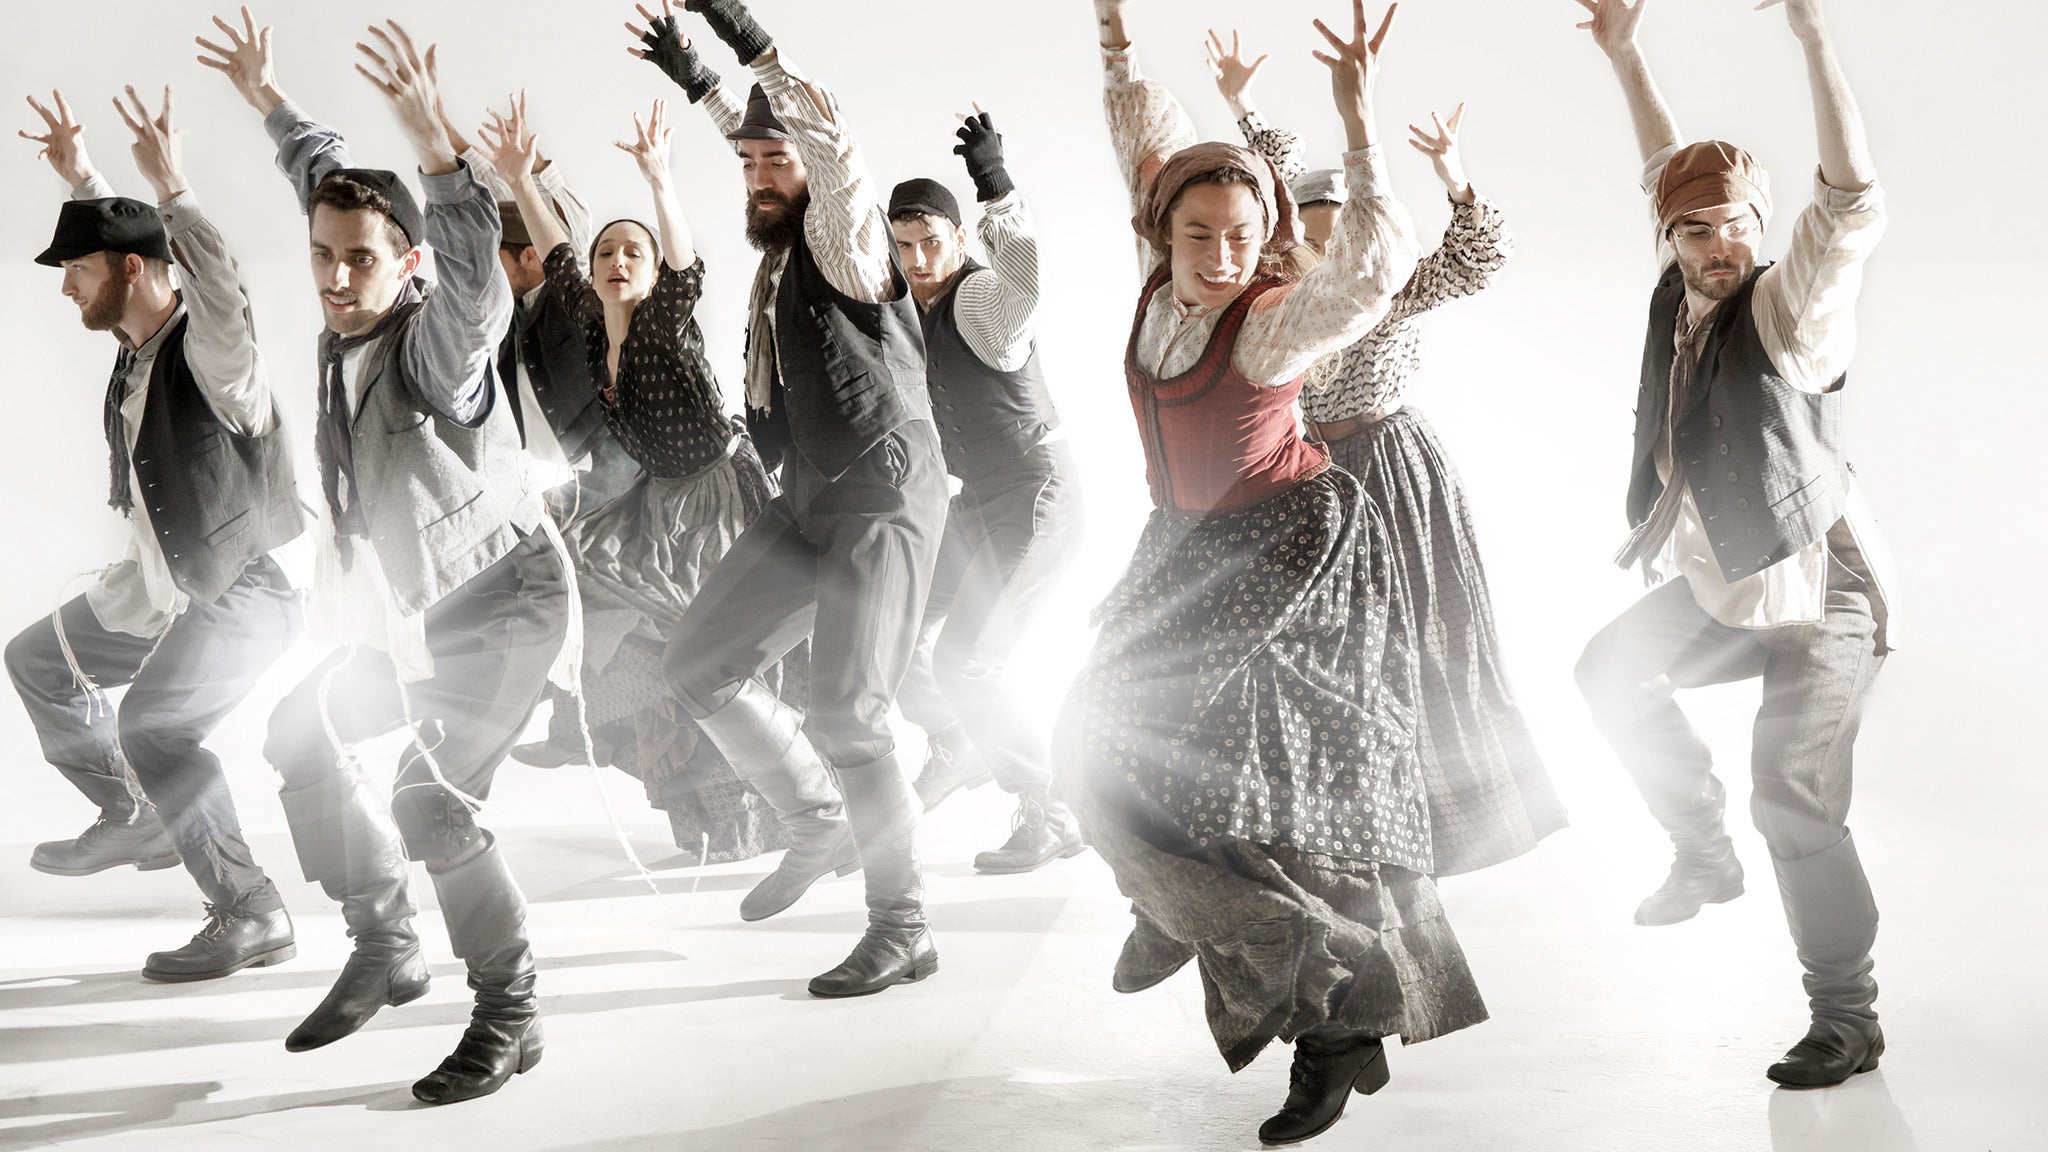 Fiddler on the Roof (Touring) in Houston promo photo for Exclusive presale offer code